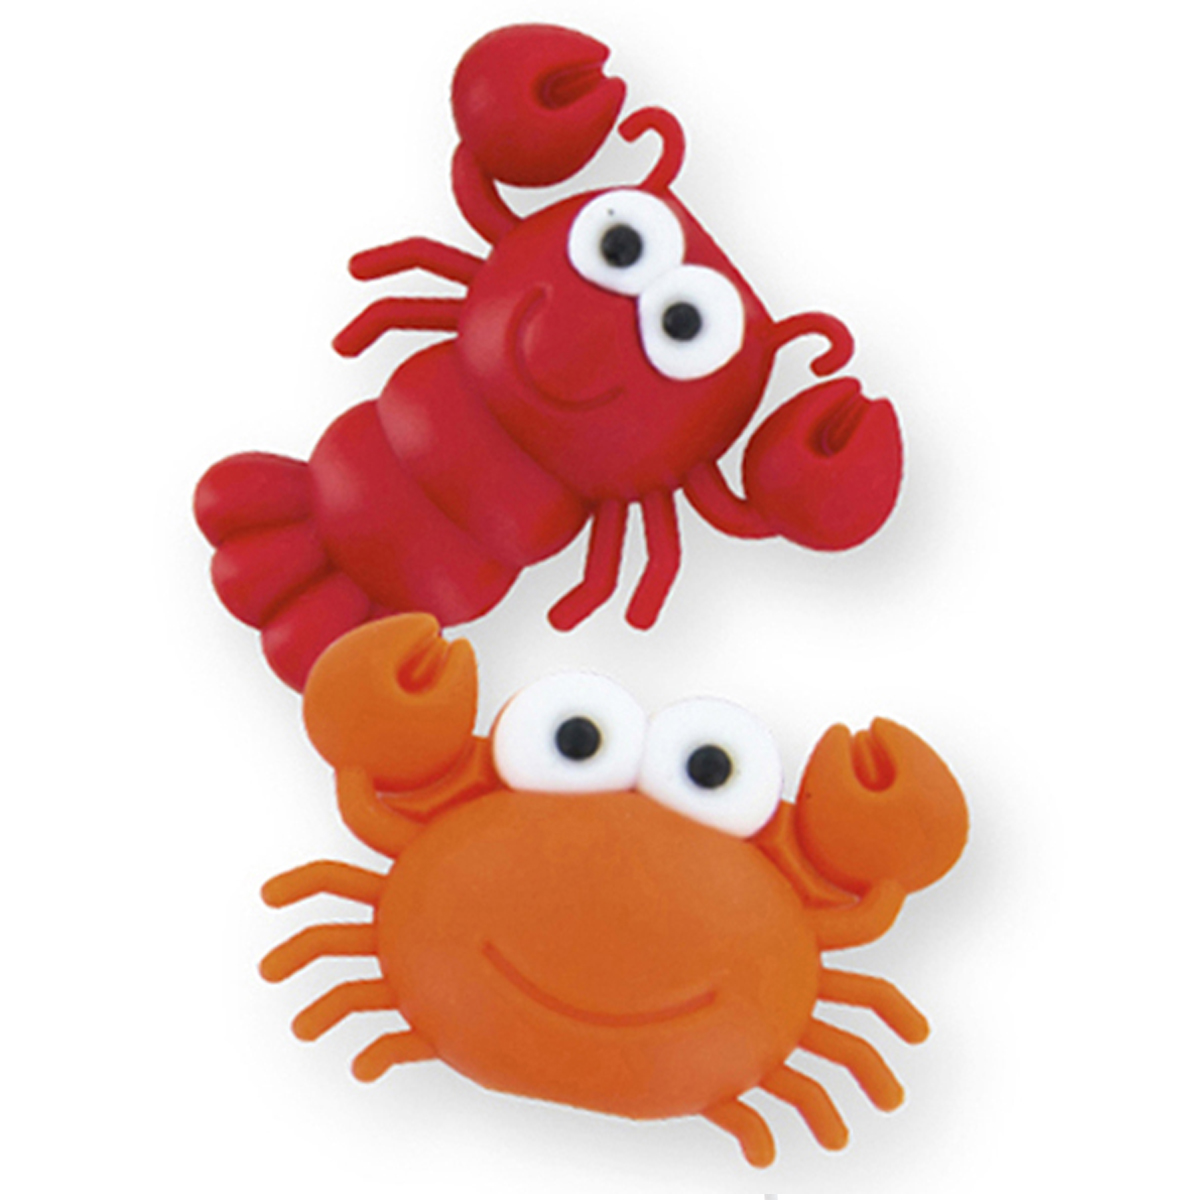 Duo protège-cables silicone 'Animaux' (crabes) rouge orange - pour